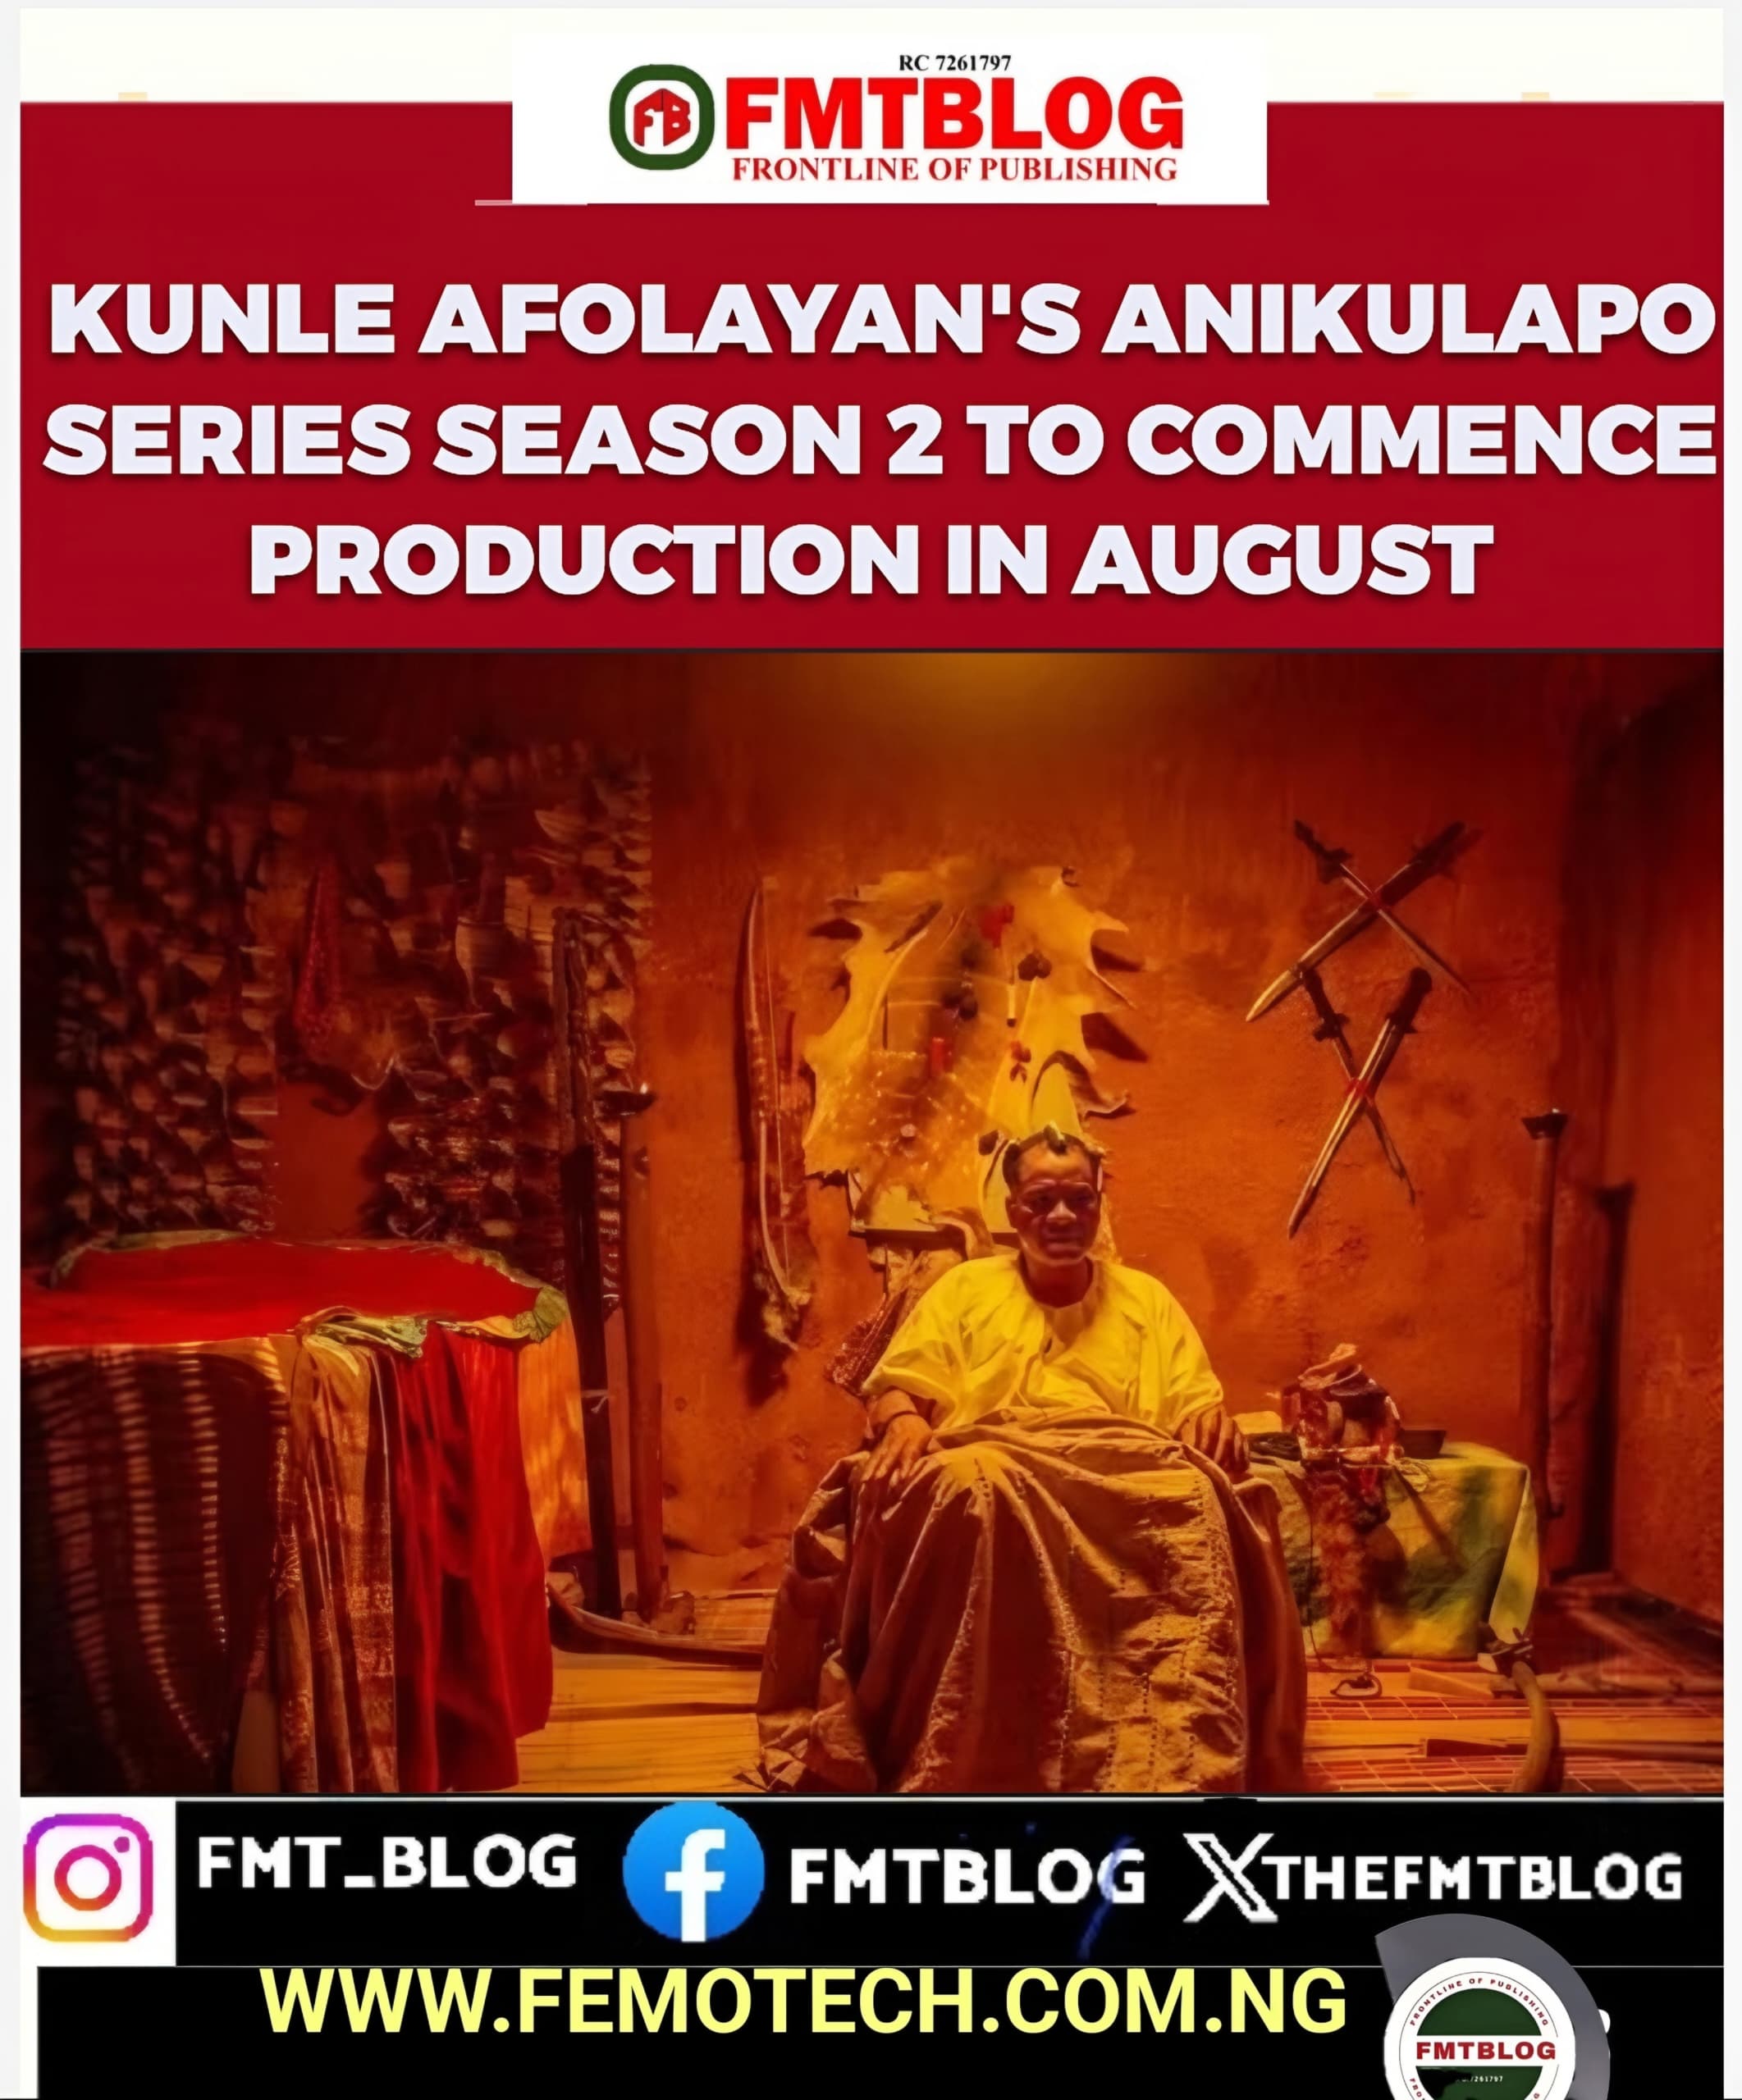 Kunle Afolayan’s Anikulapo Series Season 2 To Commence Production In August